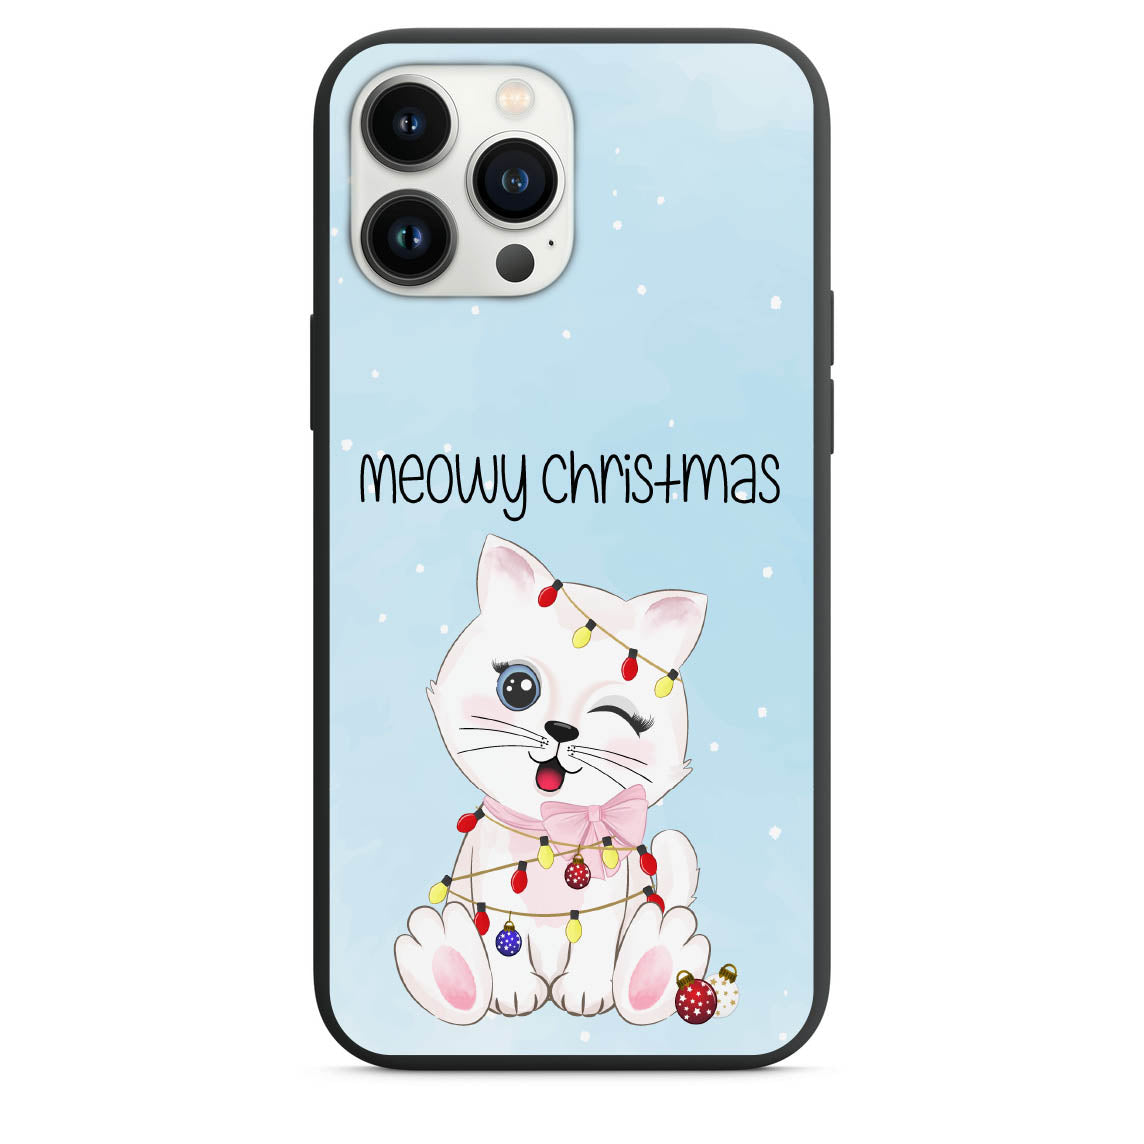 Meowy Christmas Cat Christmas Lights Phone Case for iPhone 7 8 X XS XR SE 11 12 13 14 Pro Max Mini Note s10 s10plus s20 s21 20plus